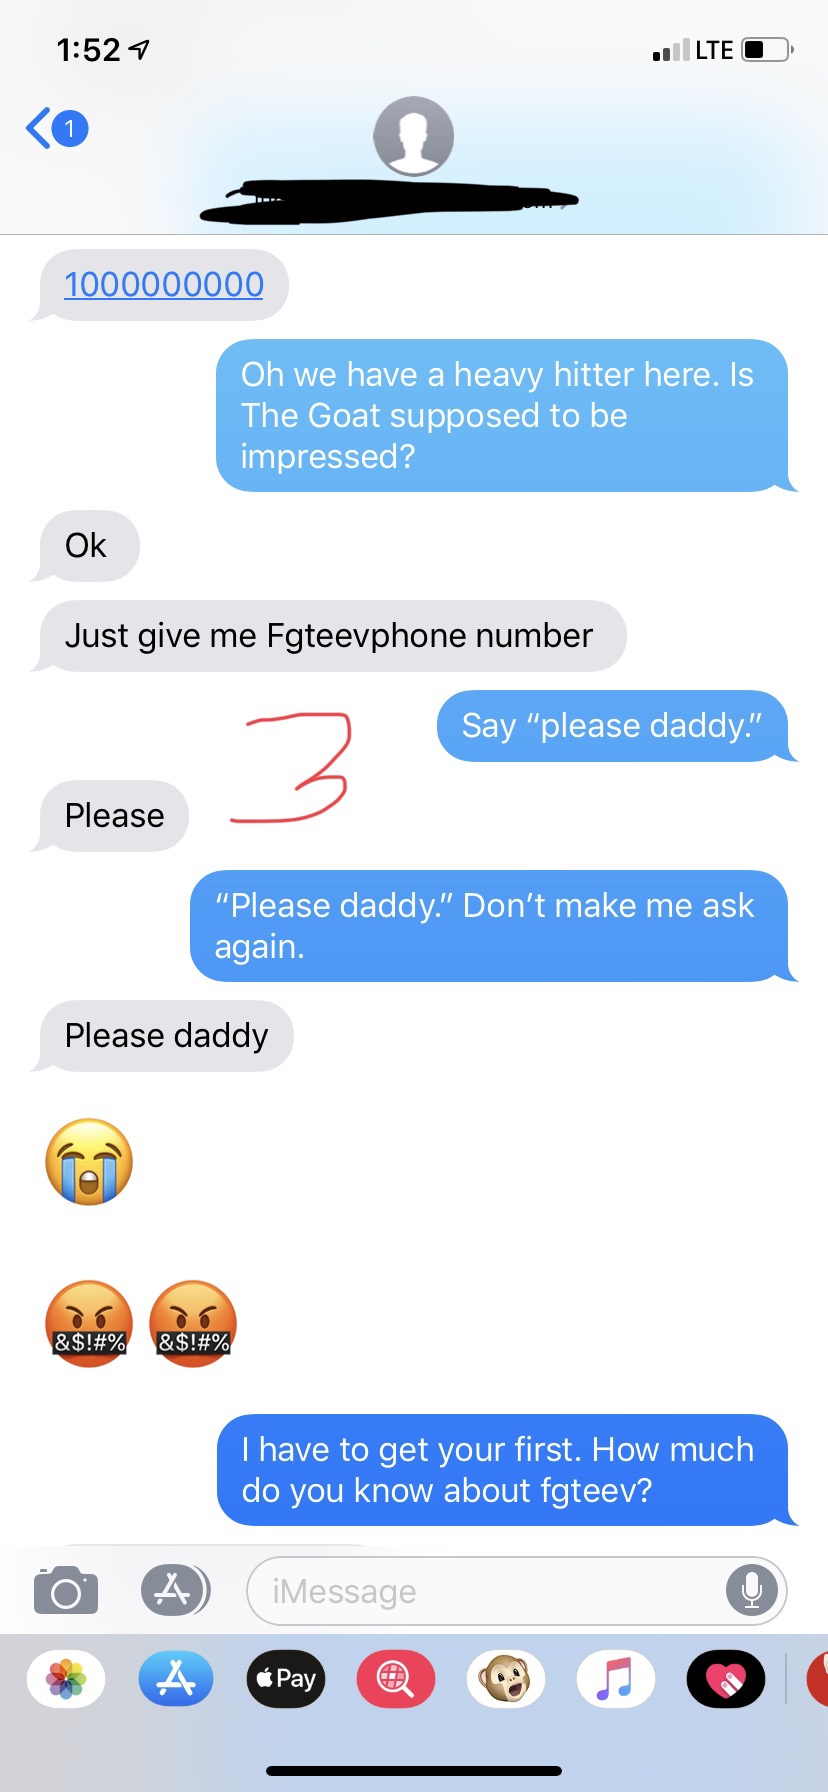 you re my number neighbor - Lte O 1000000000 Oh we have a heavy hitter here. Is The Goat supposed to be impressed? Ok Just give me Fgteevphone number Say "please daddy." 2. Please "Please daddy." Don't make me ask again. Please daddy &$!#% &$!#% I have to